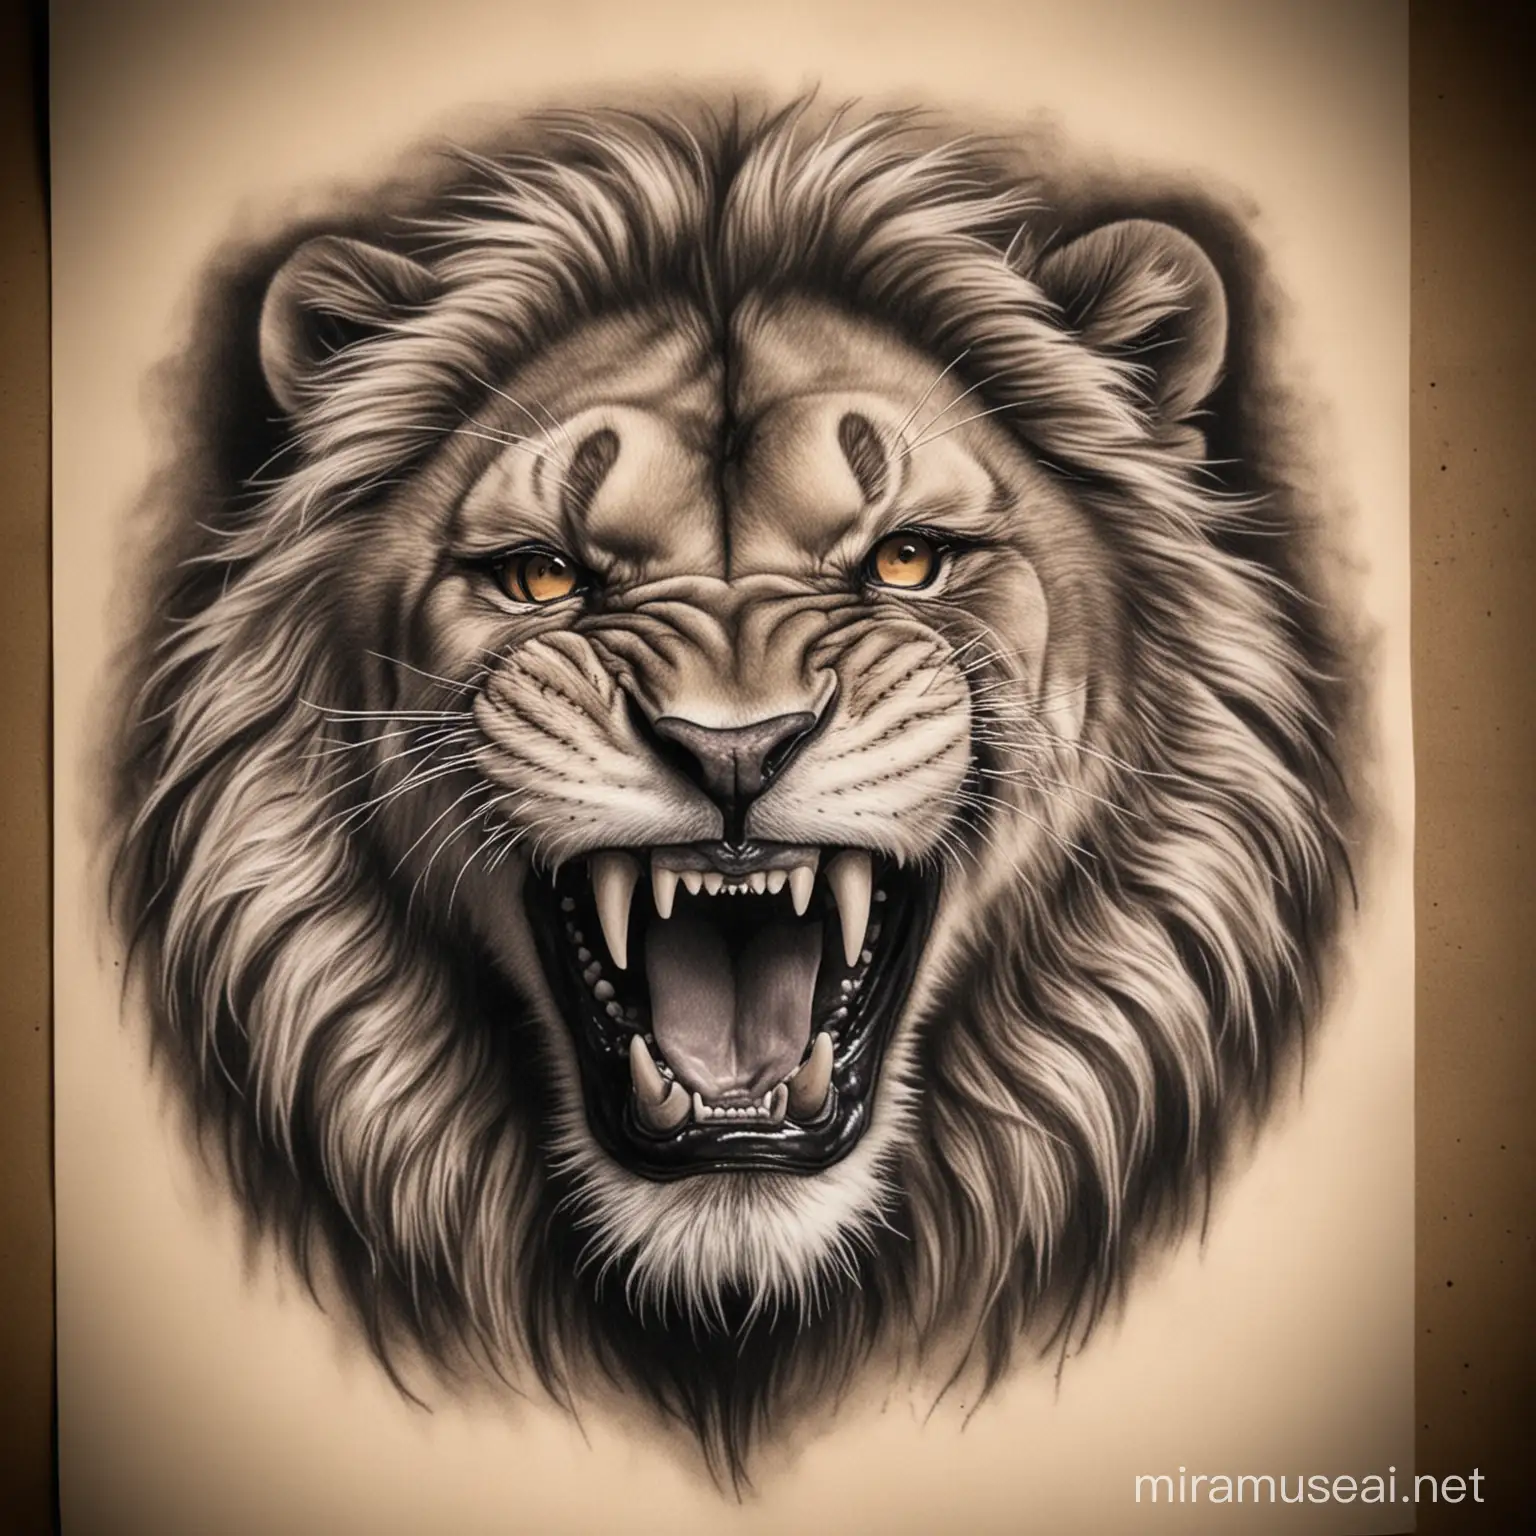 Realistic Lion with Open Mouth and Evil Eyes Tattoo Stencil